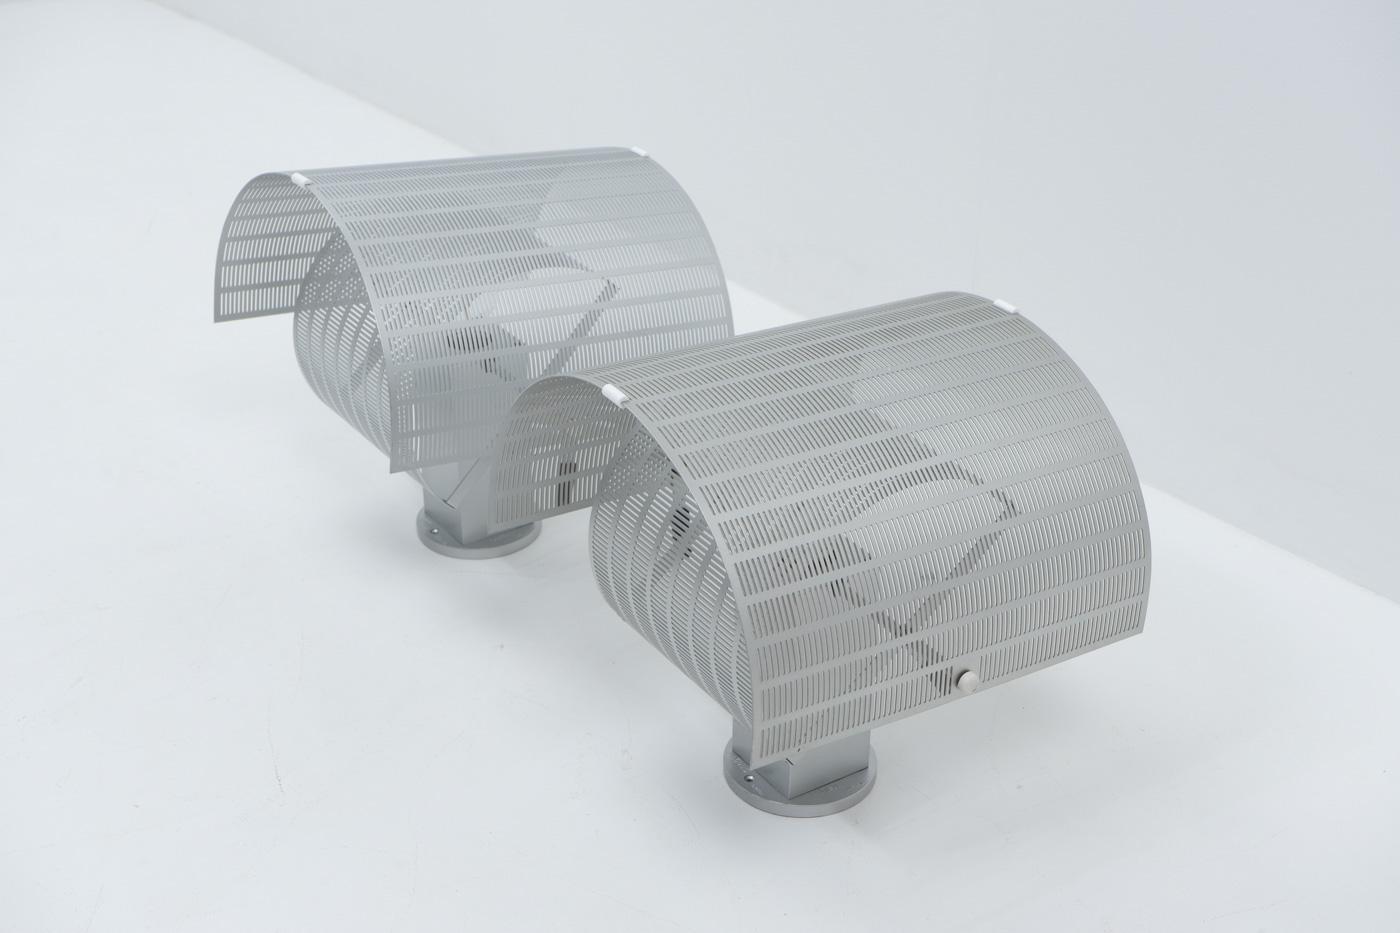 Mid-Century Modern Limited Edition Shogun Wall Lamps by Mario Botta for Artemide, 1980s For Sale